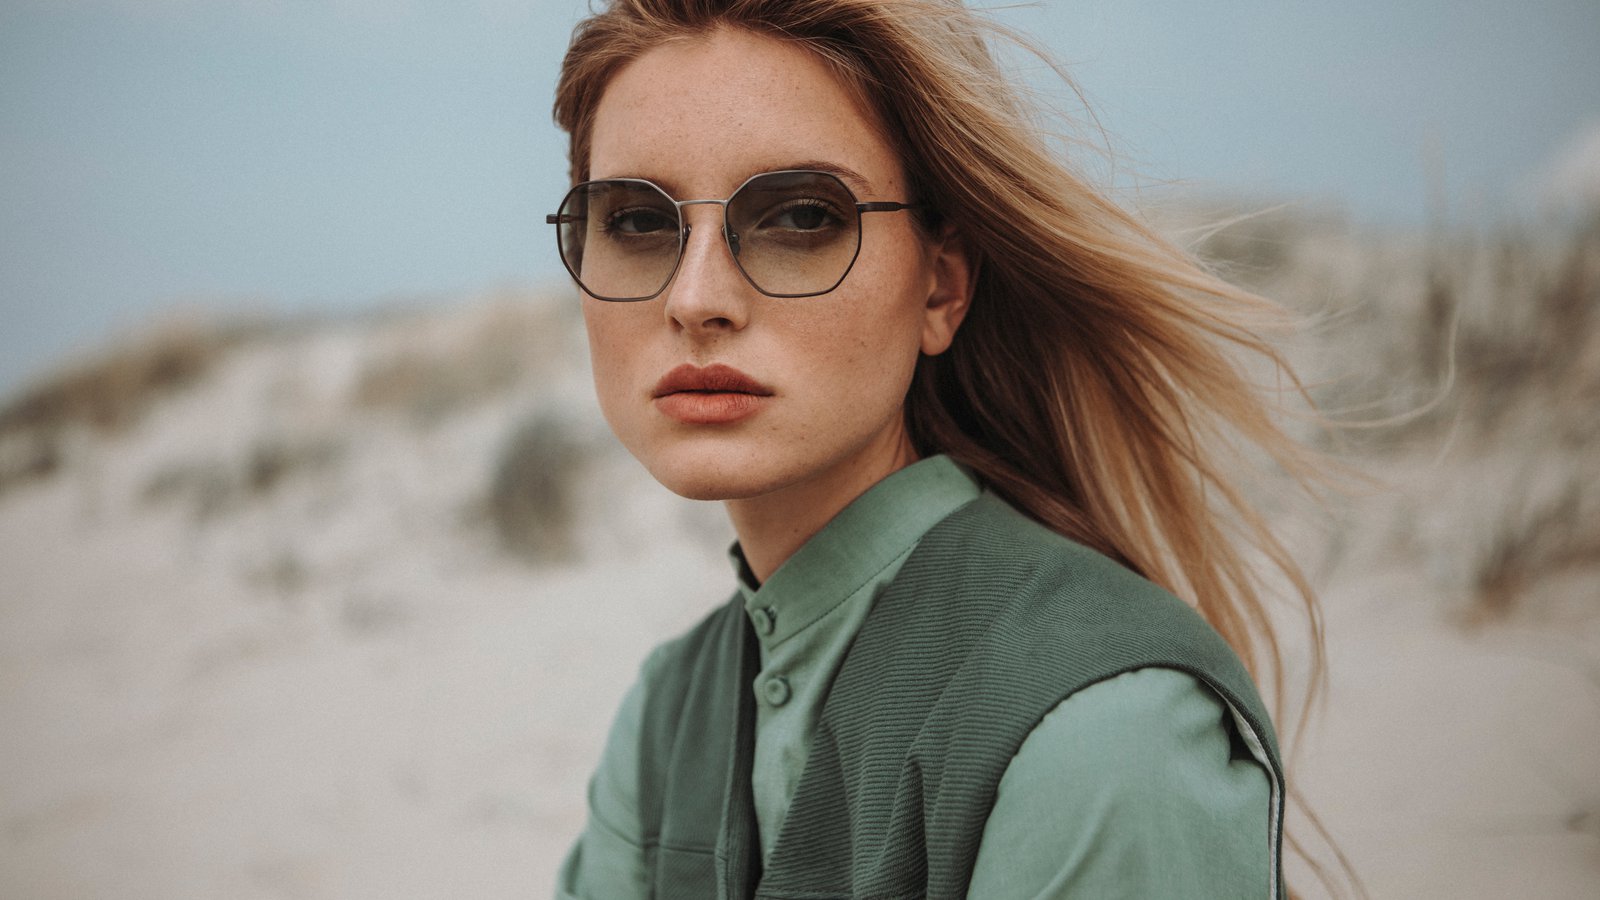 Eyeglasses by EINSTOFFEN from article The Best Independent Eyewear Brands published by FAVR the premium eyewear finder.